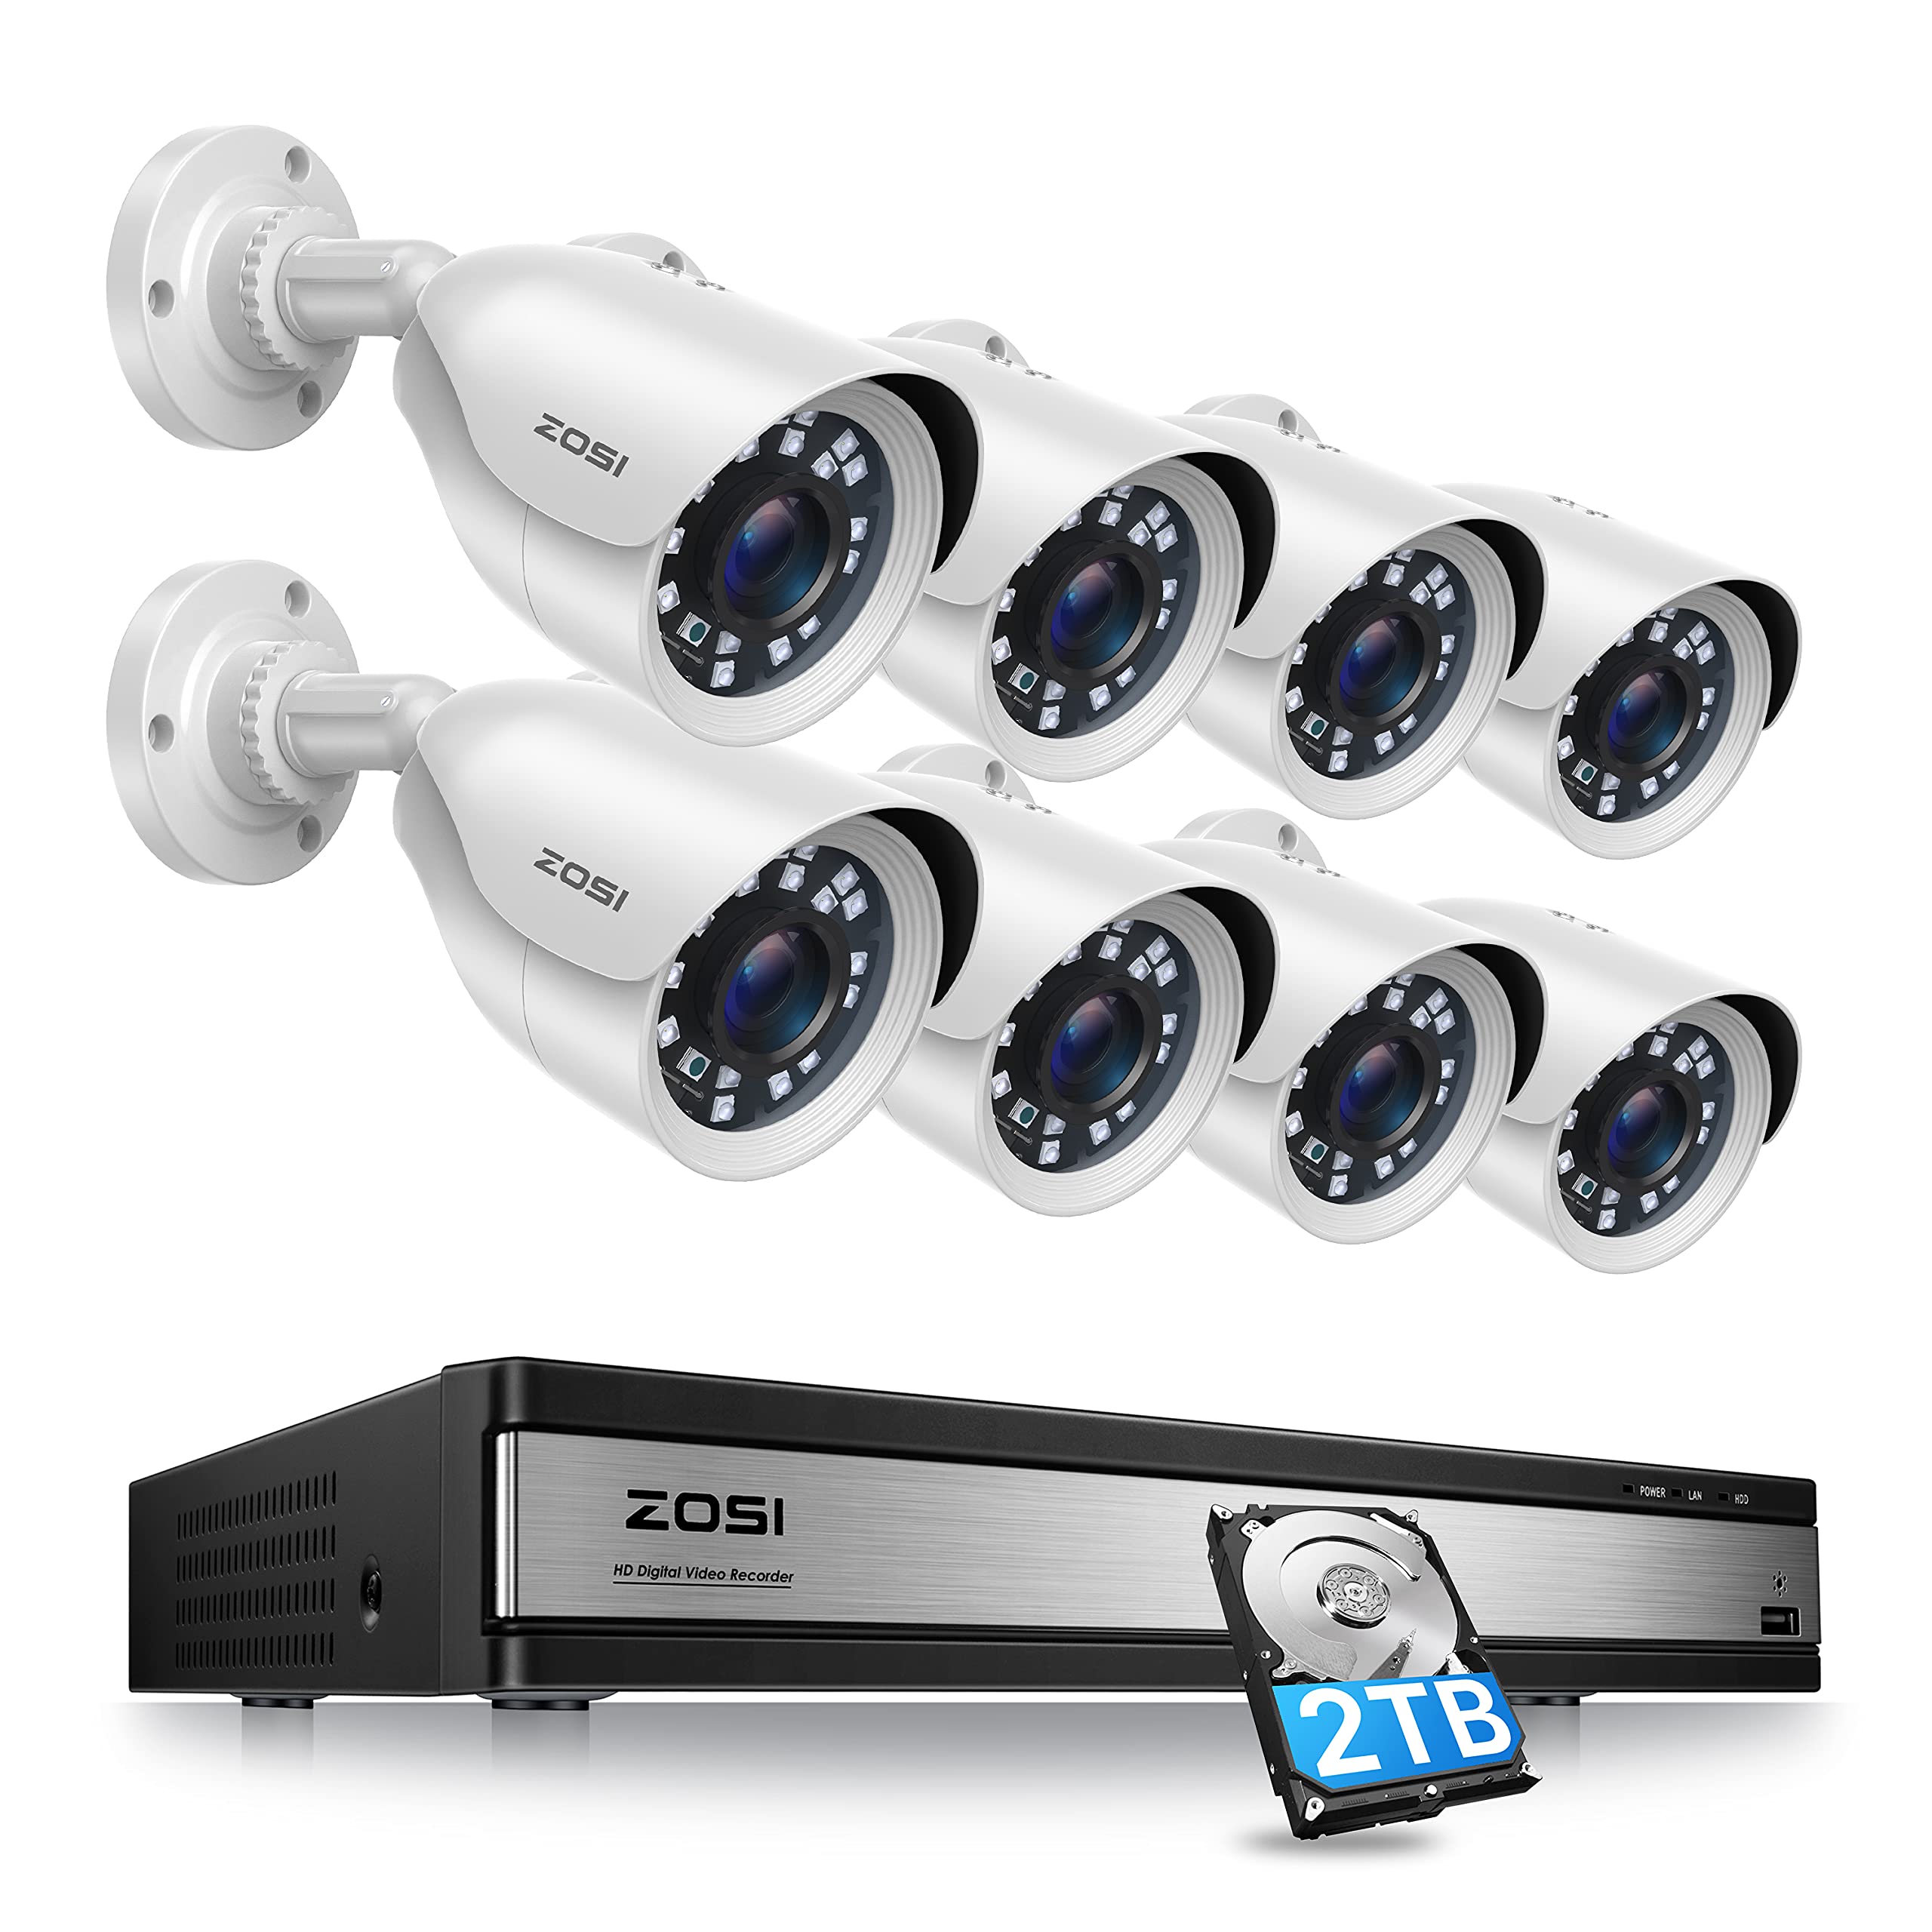 ZOSI H.265+ 1080p 16 channel Security camera System, 16 channel DVR with Hard Drive 2TB and 8 x 1080p Weatherproof Surve